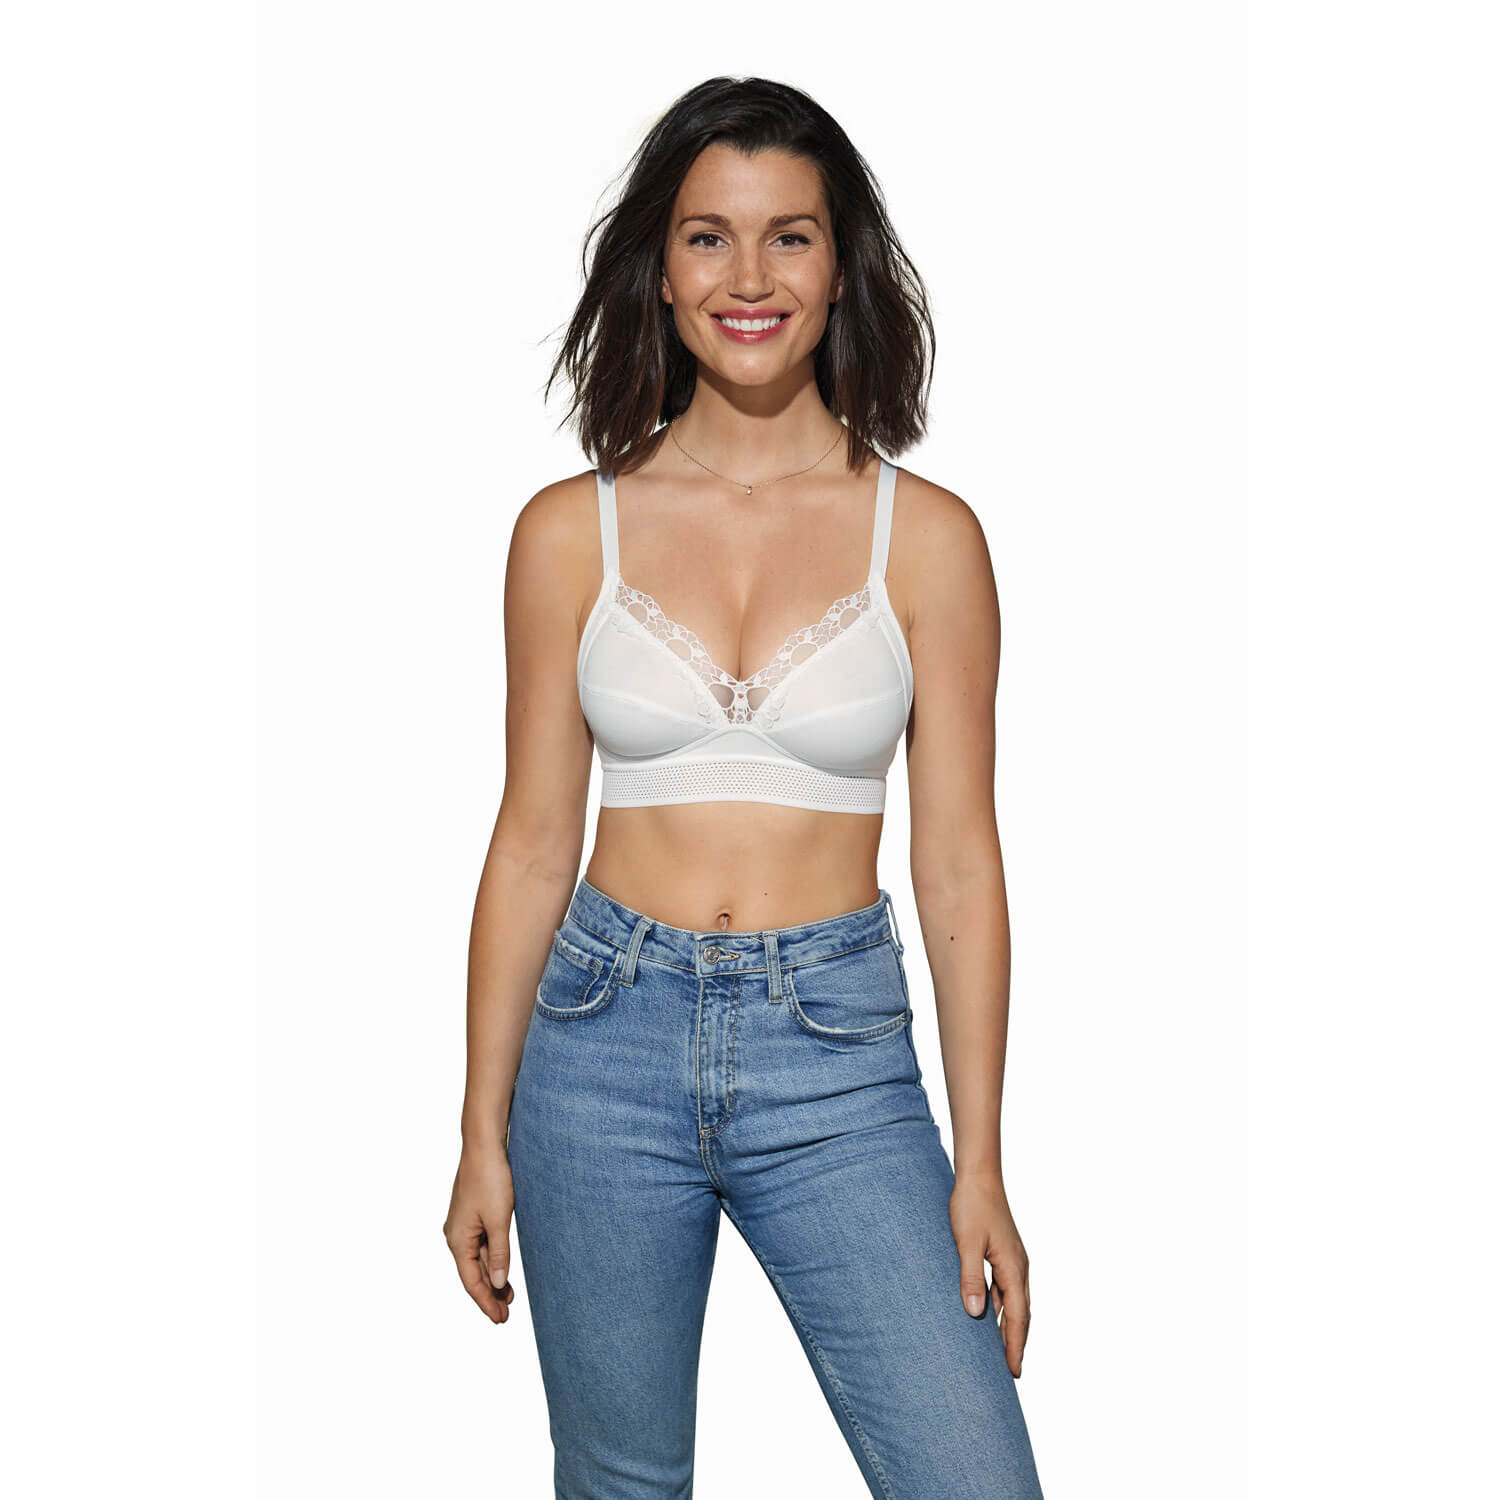 PLAYTEX FEEL GOOD SUPPORT White - Free delivery